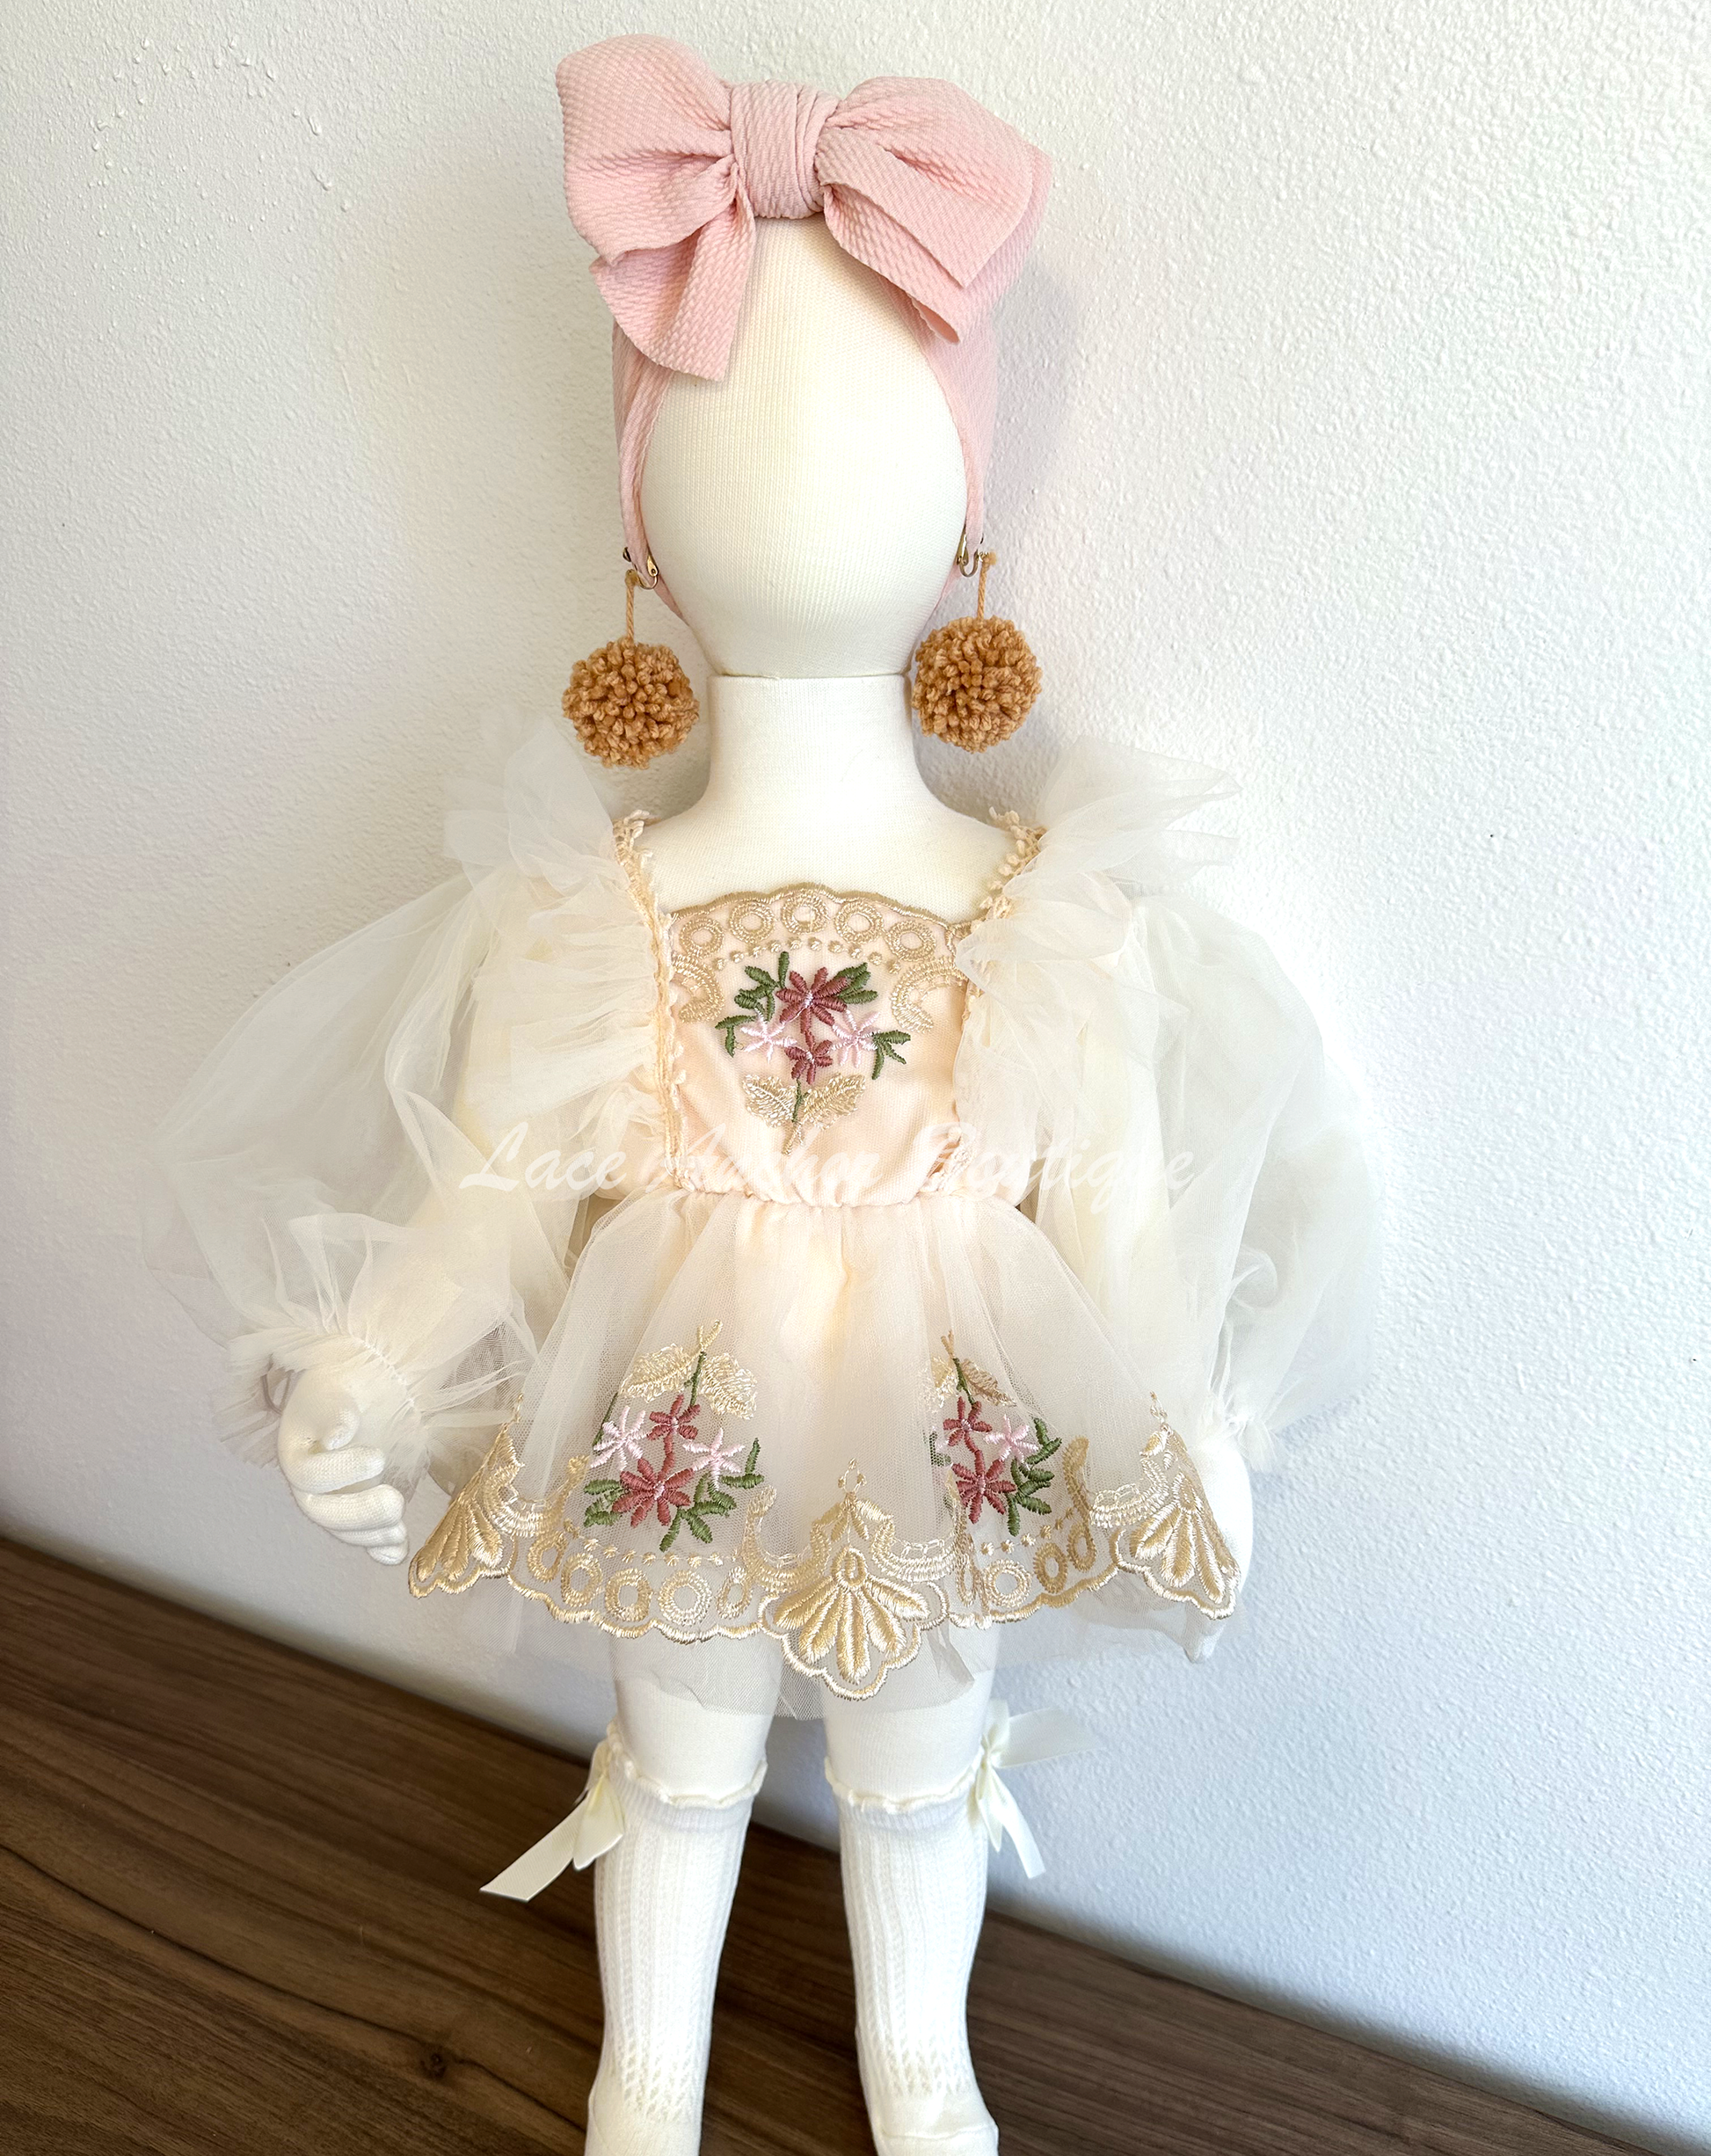 baby toddler girls flower girl romper with long puff sleeves, embroidered gold floral trim, skirt, and tied back. In white